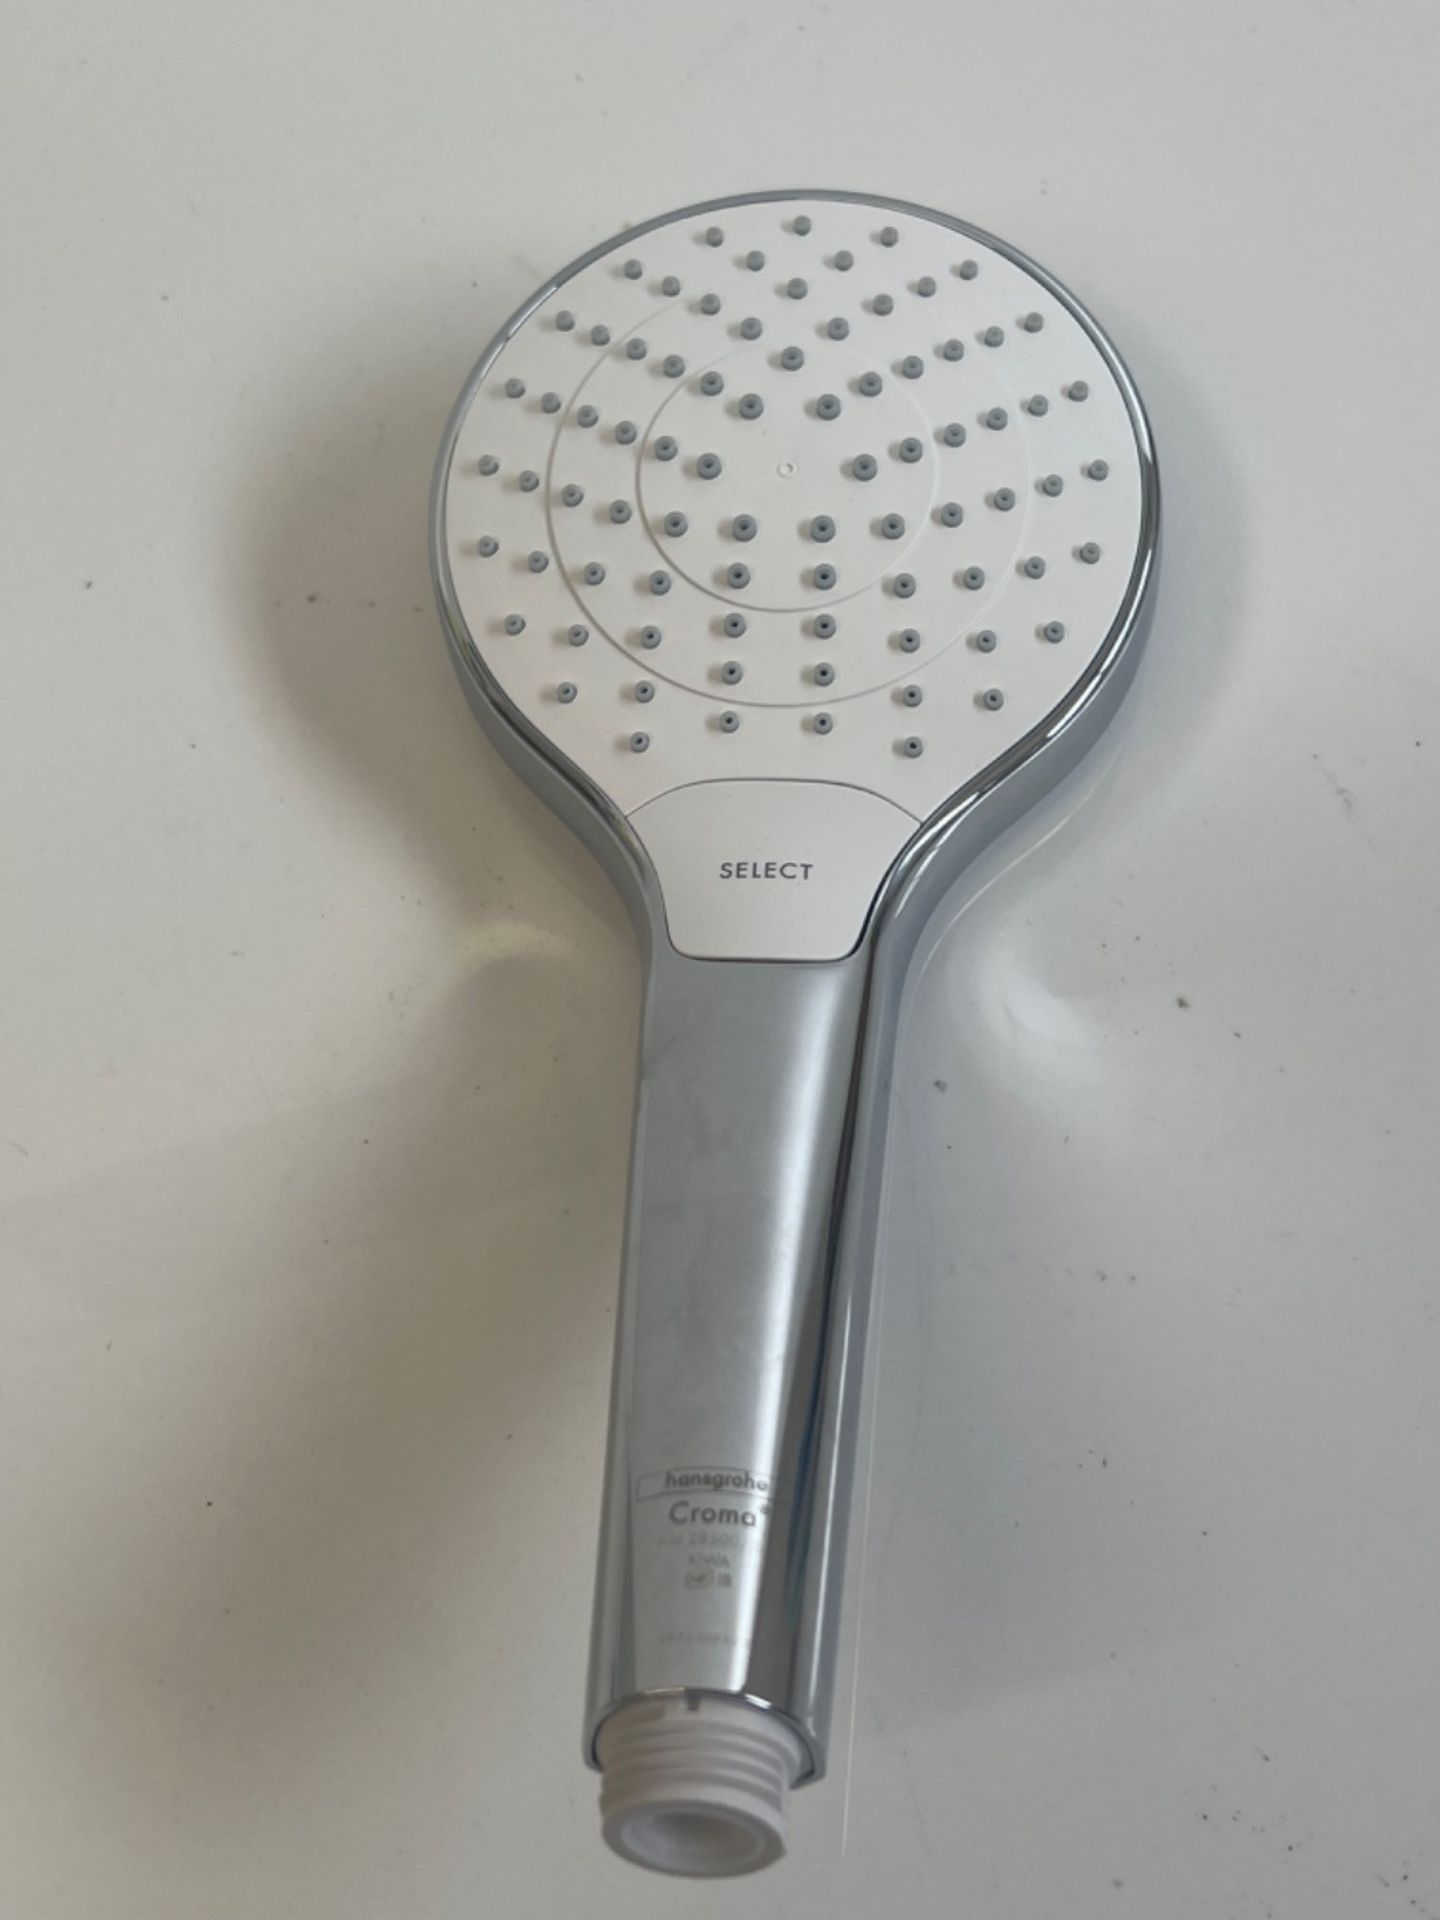 hansgrohe Croma Select S 110 Vario hand shower, 3 spray modes, white/chrome - Image 3 of 3